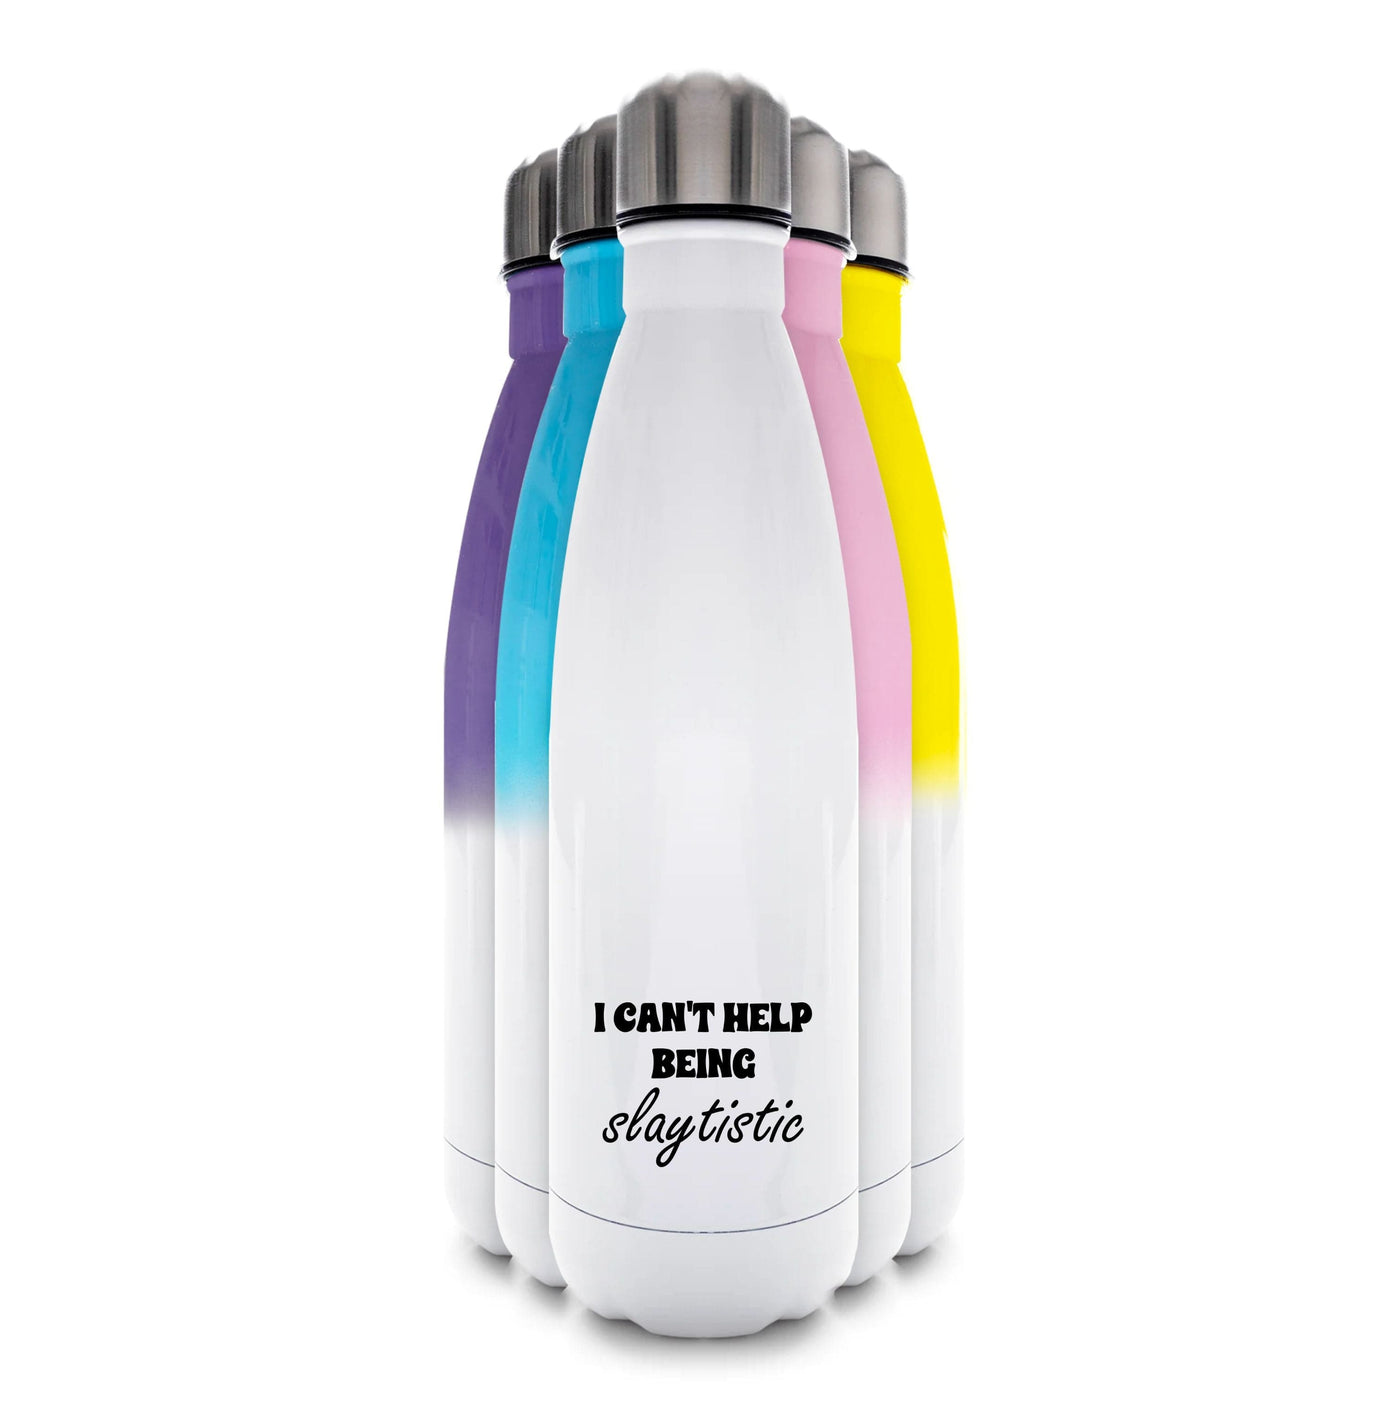 I Can't Help Being Slaytistic - TikTok Trends Water Bottle